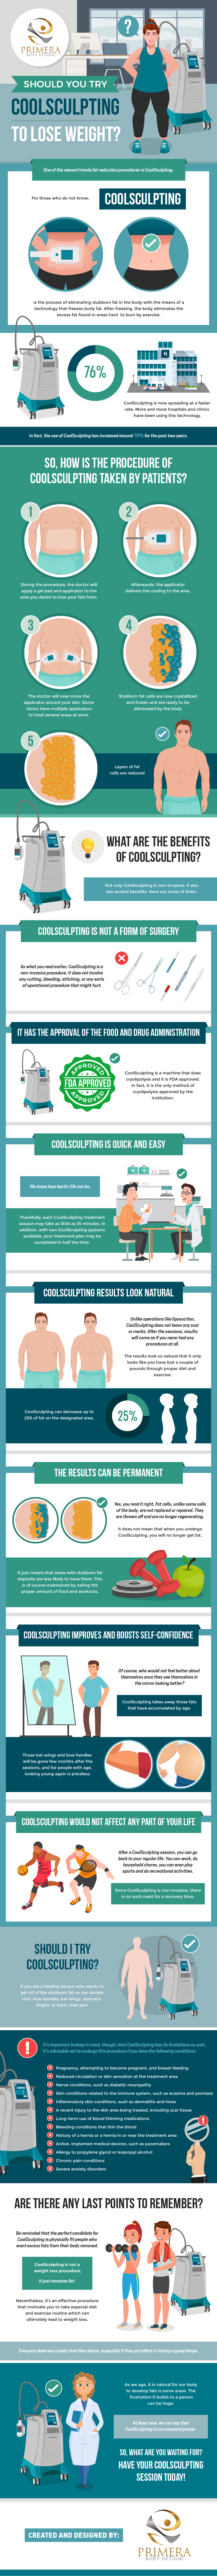 Should you try CoolSculpting to Lose Weight?